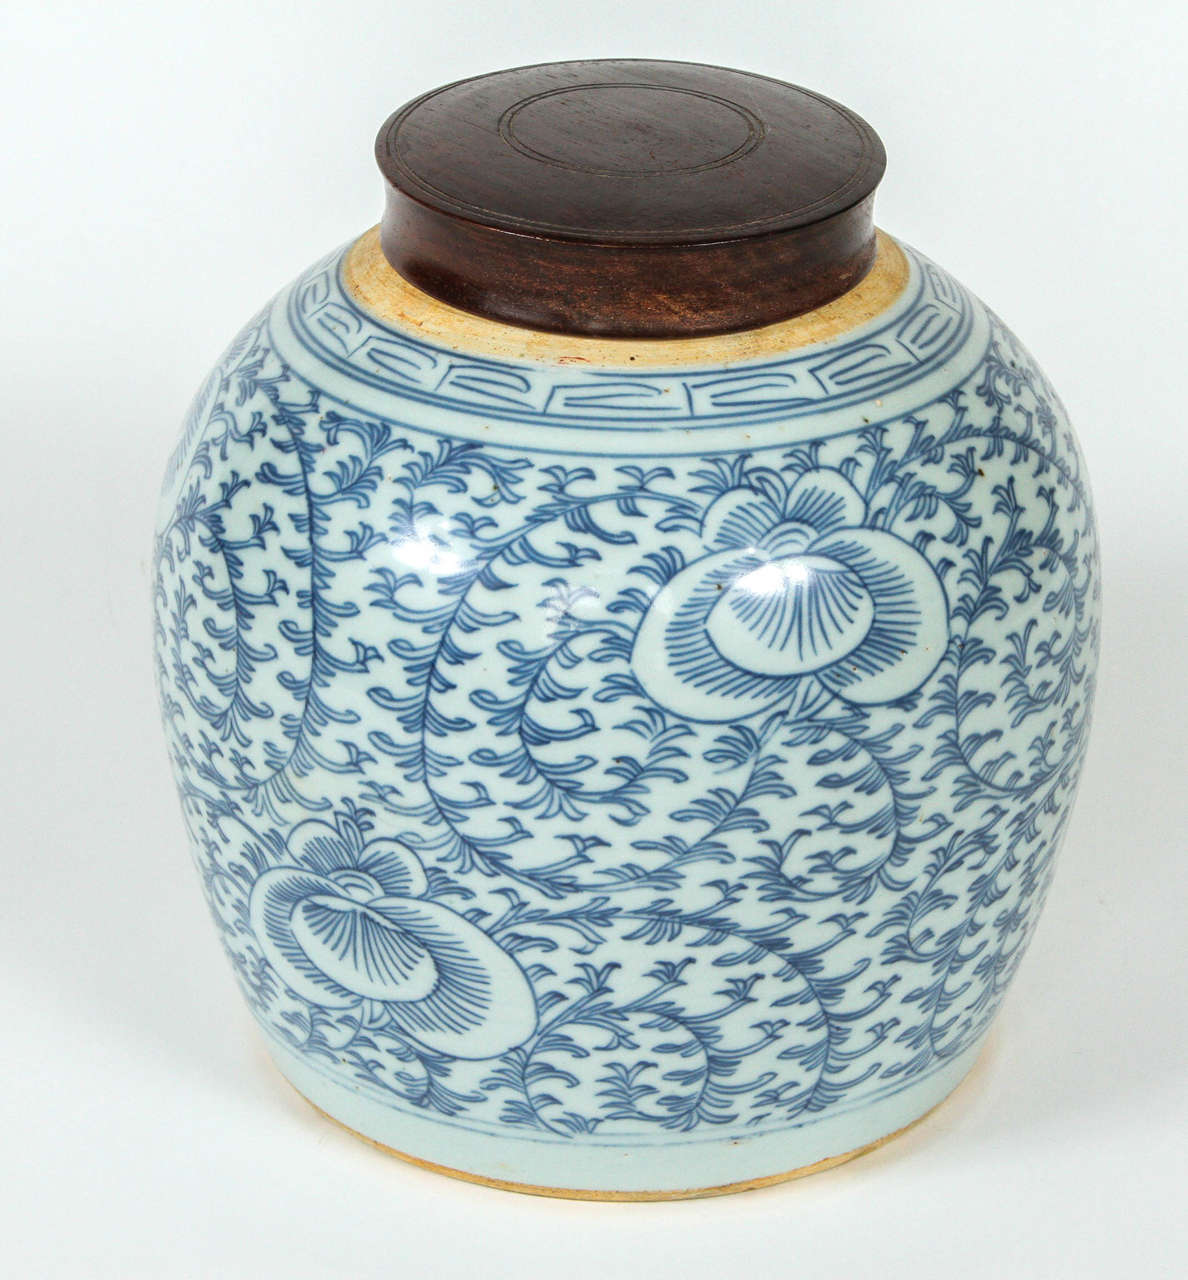 A 19th c. Chinese Blue and White Porcelain Ginger Jar with Wooden Top